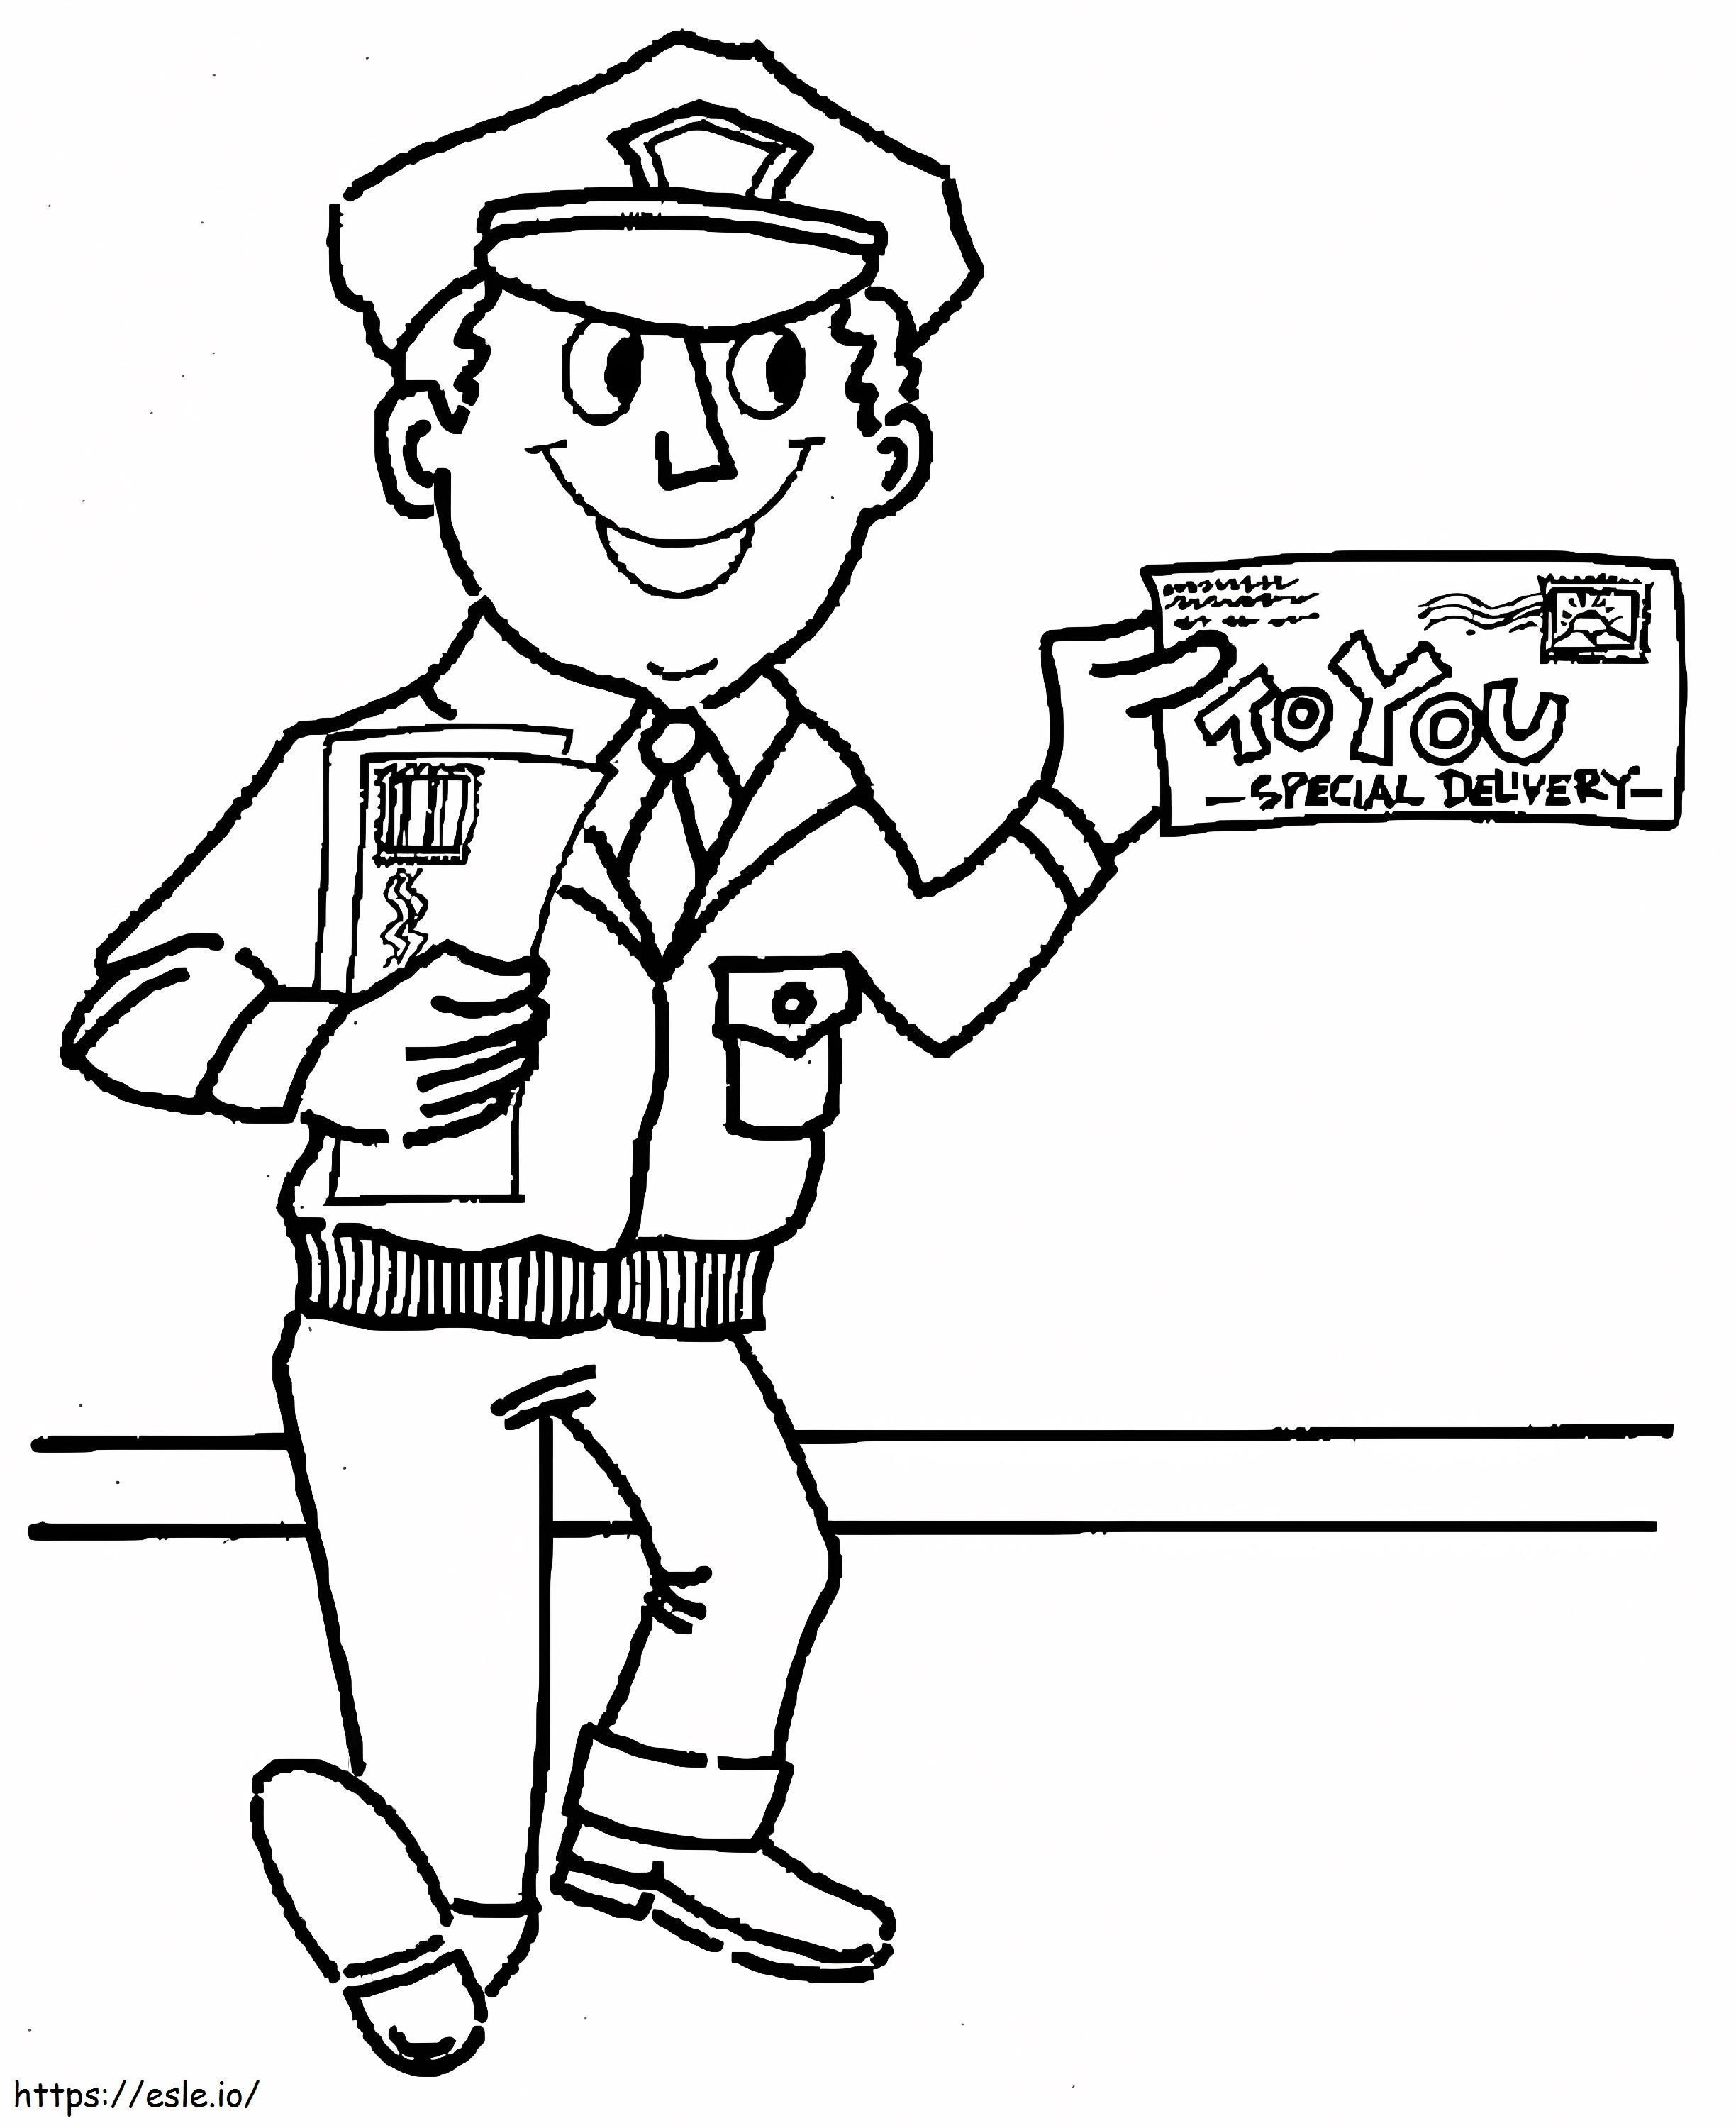 Police Postman coloring page